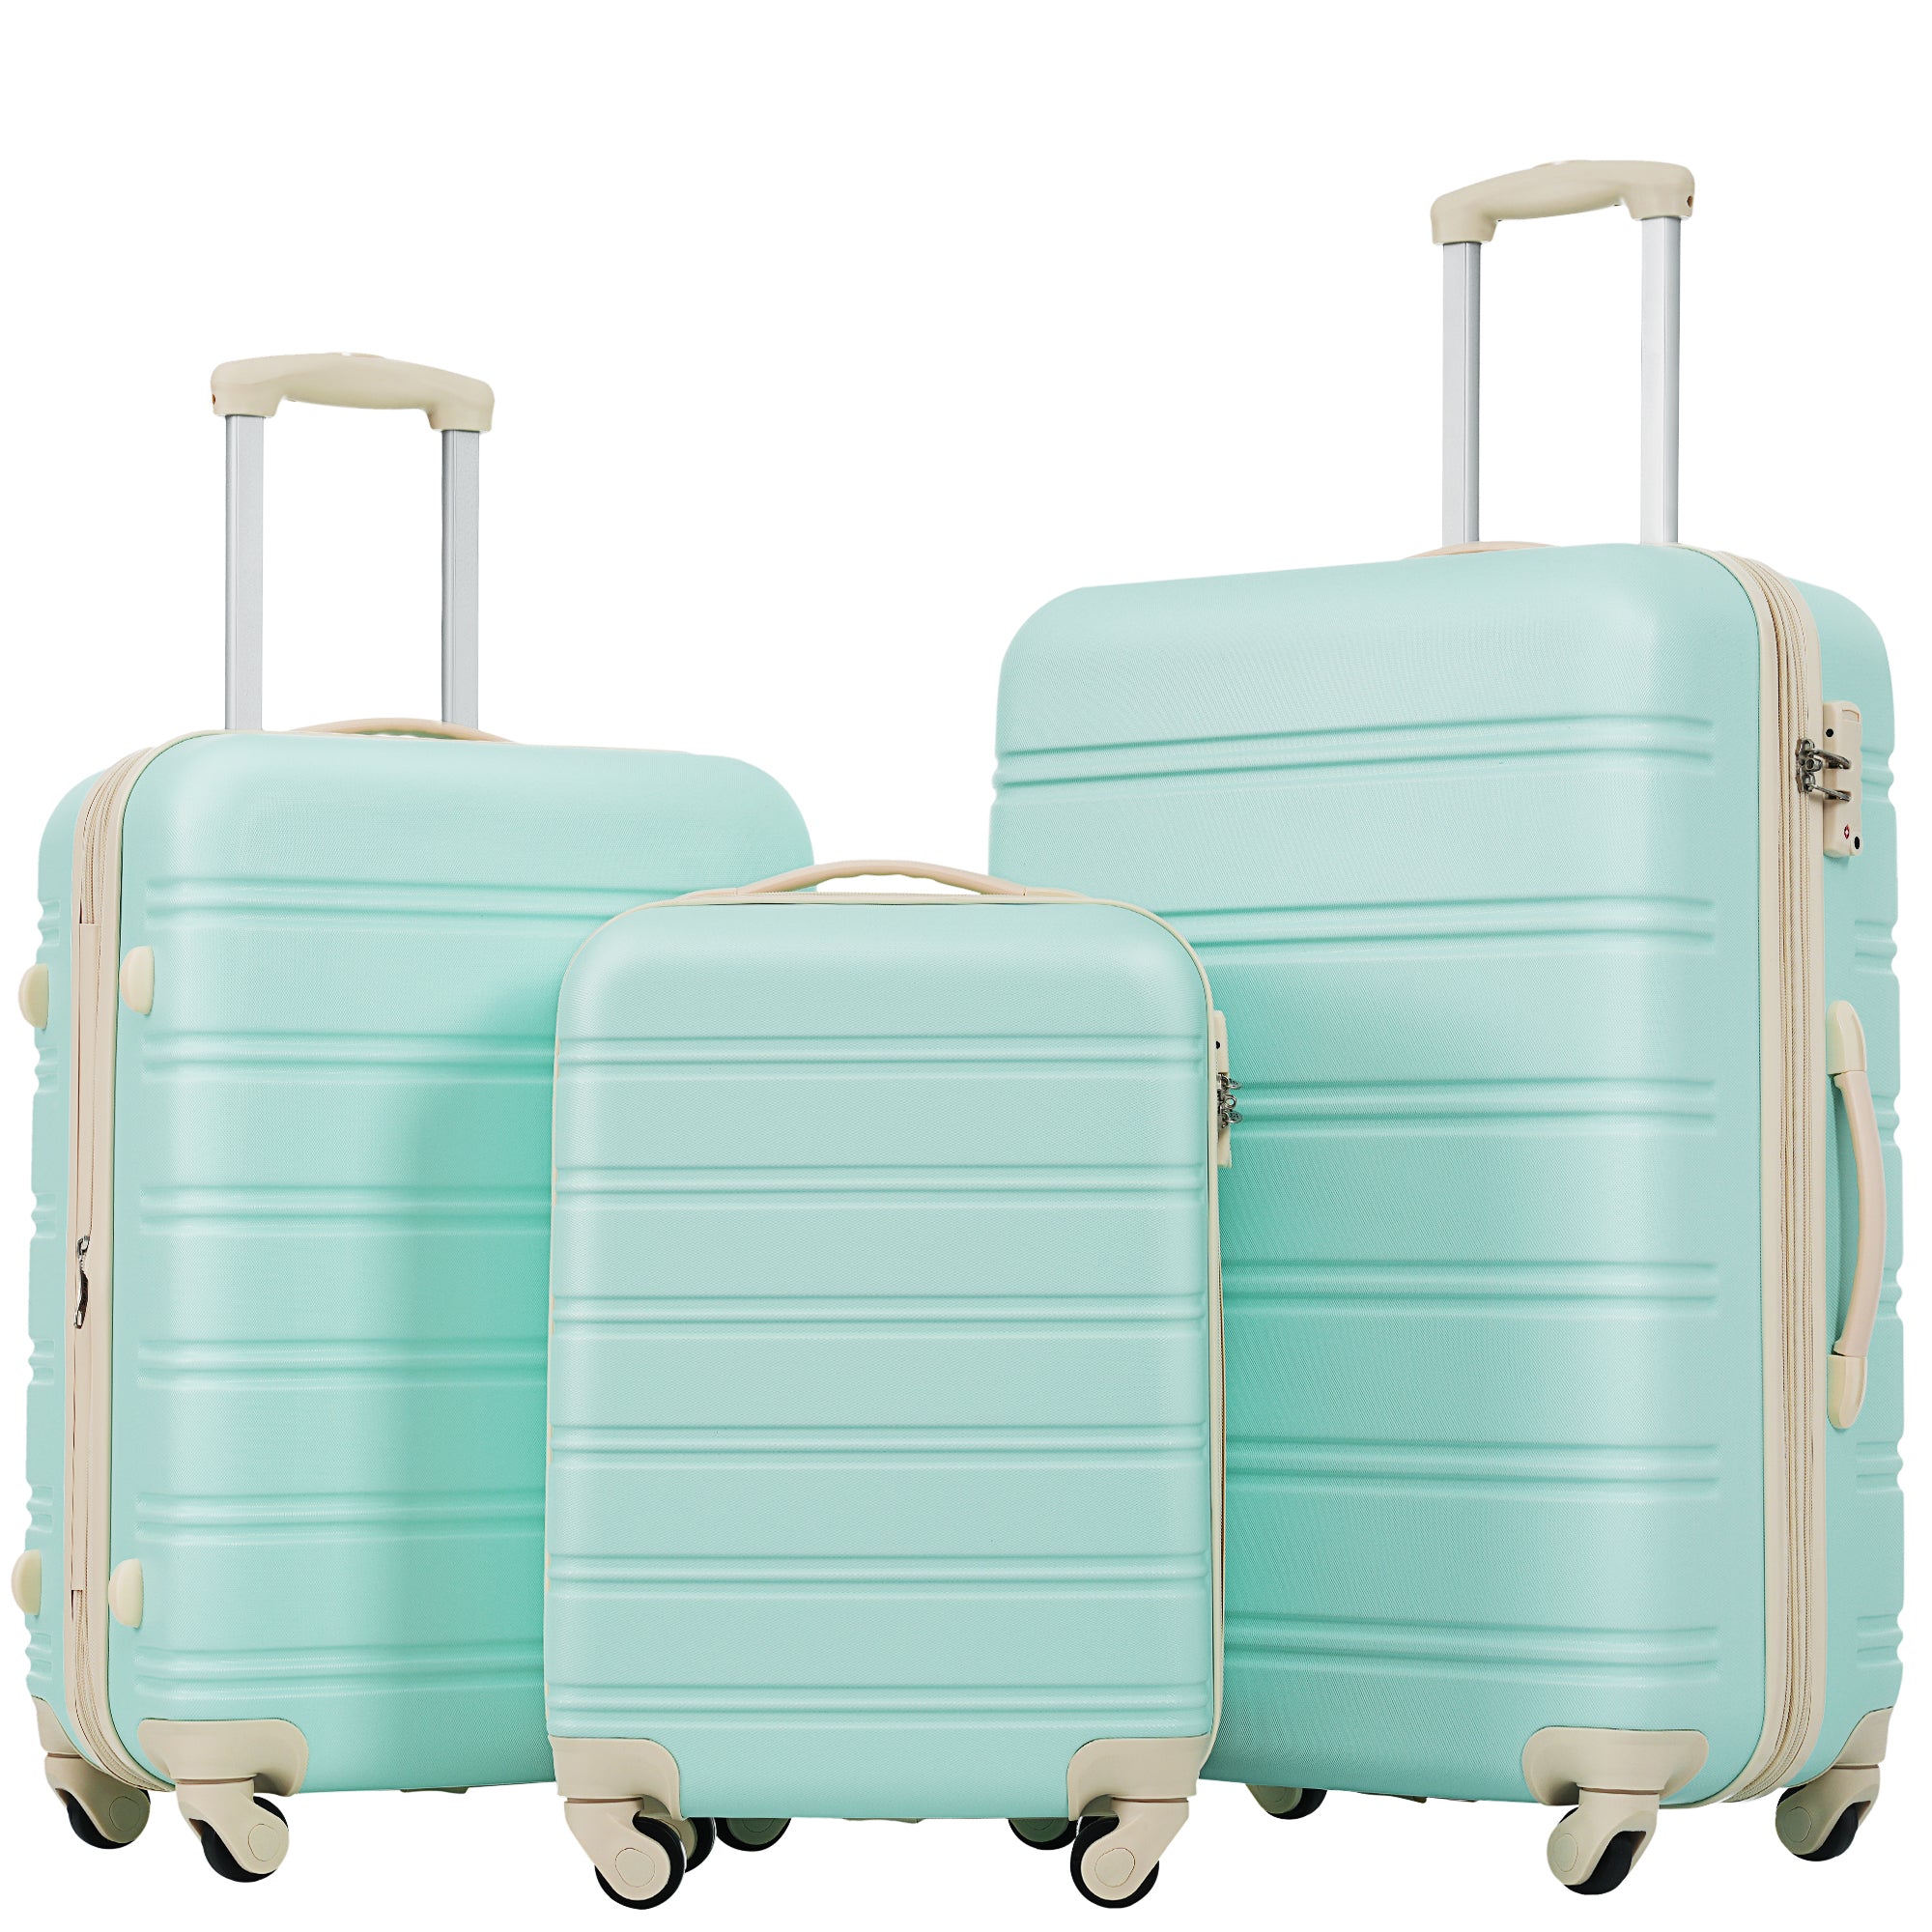 3 Piece Luggage Set Hardside Spinner Suitcase with TSA light green-abs